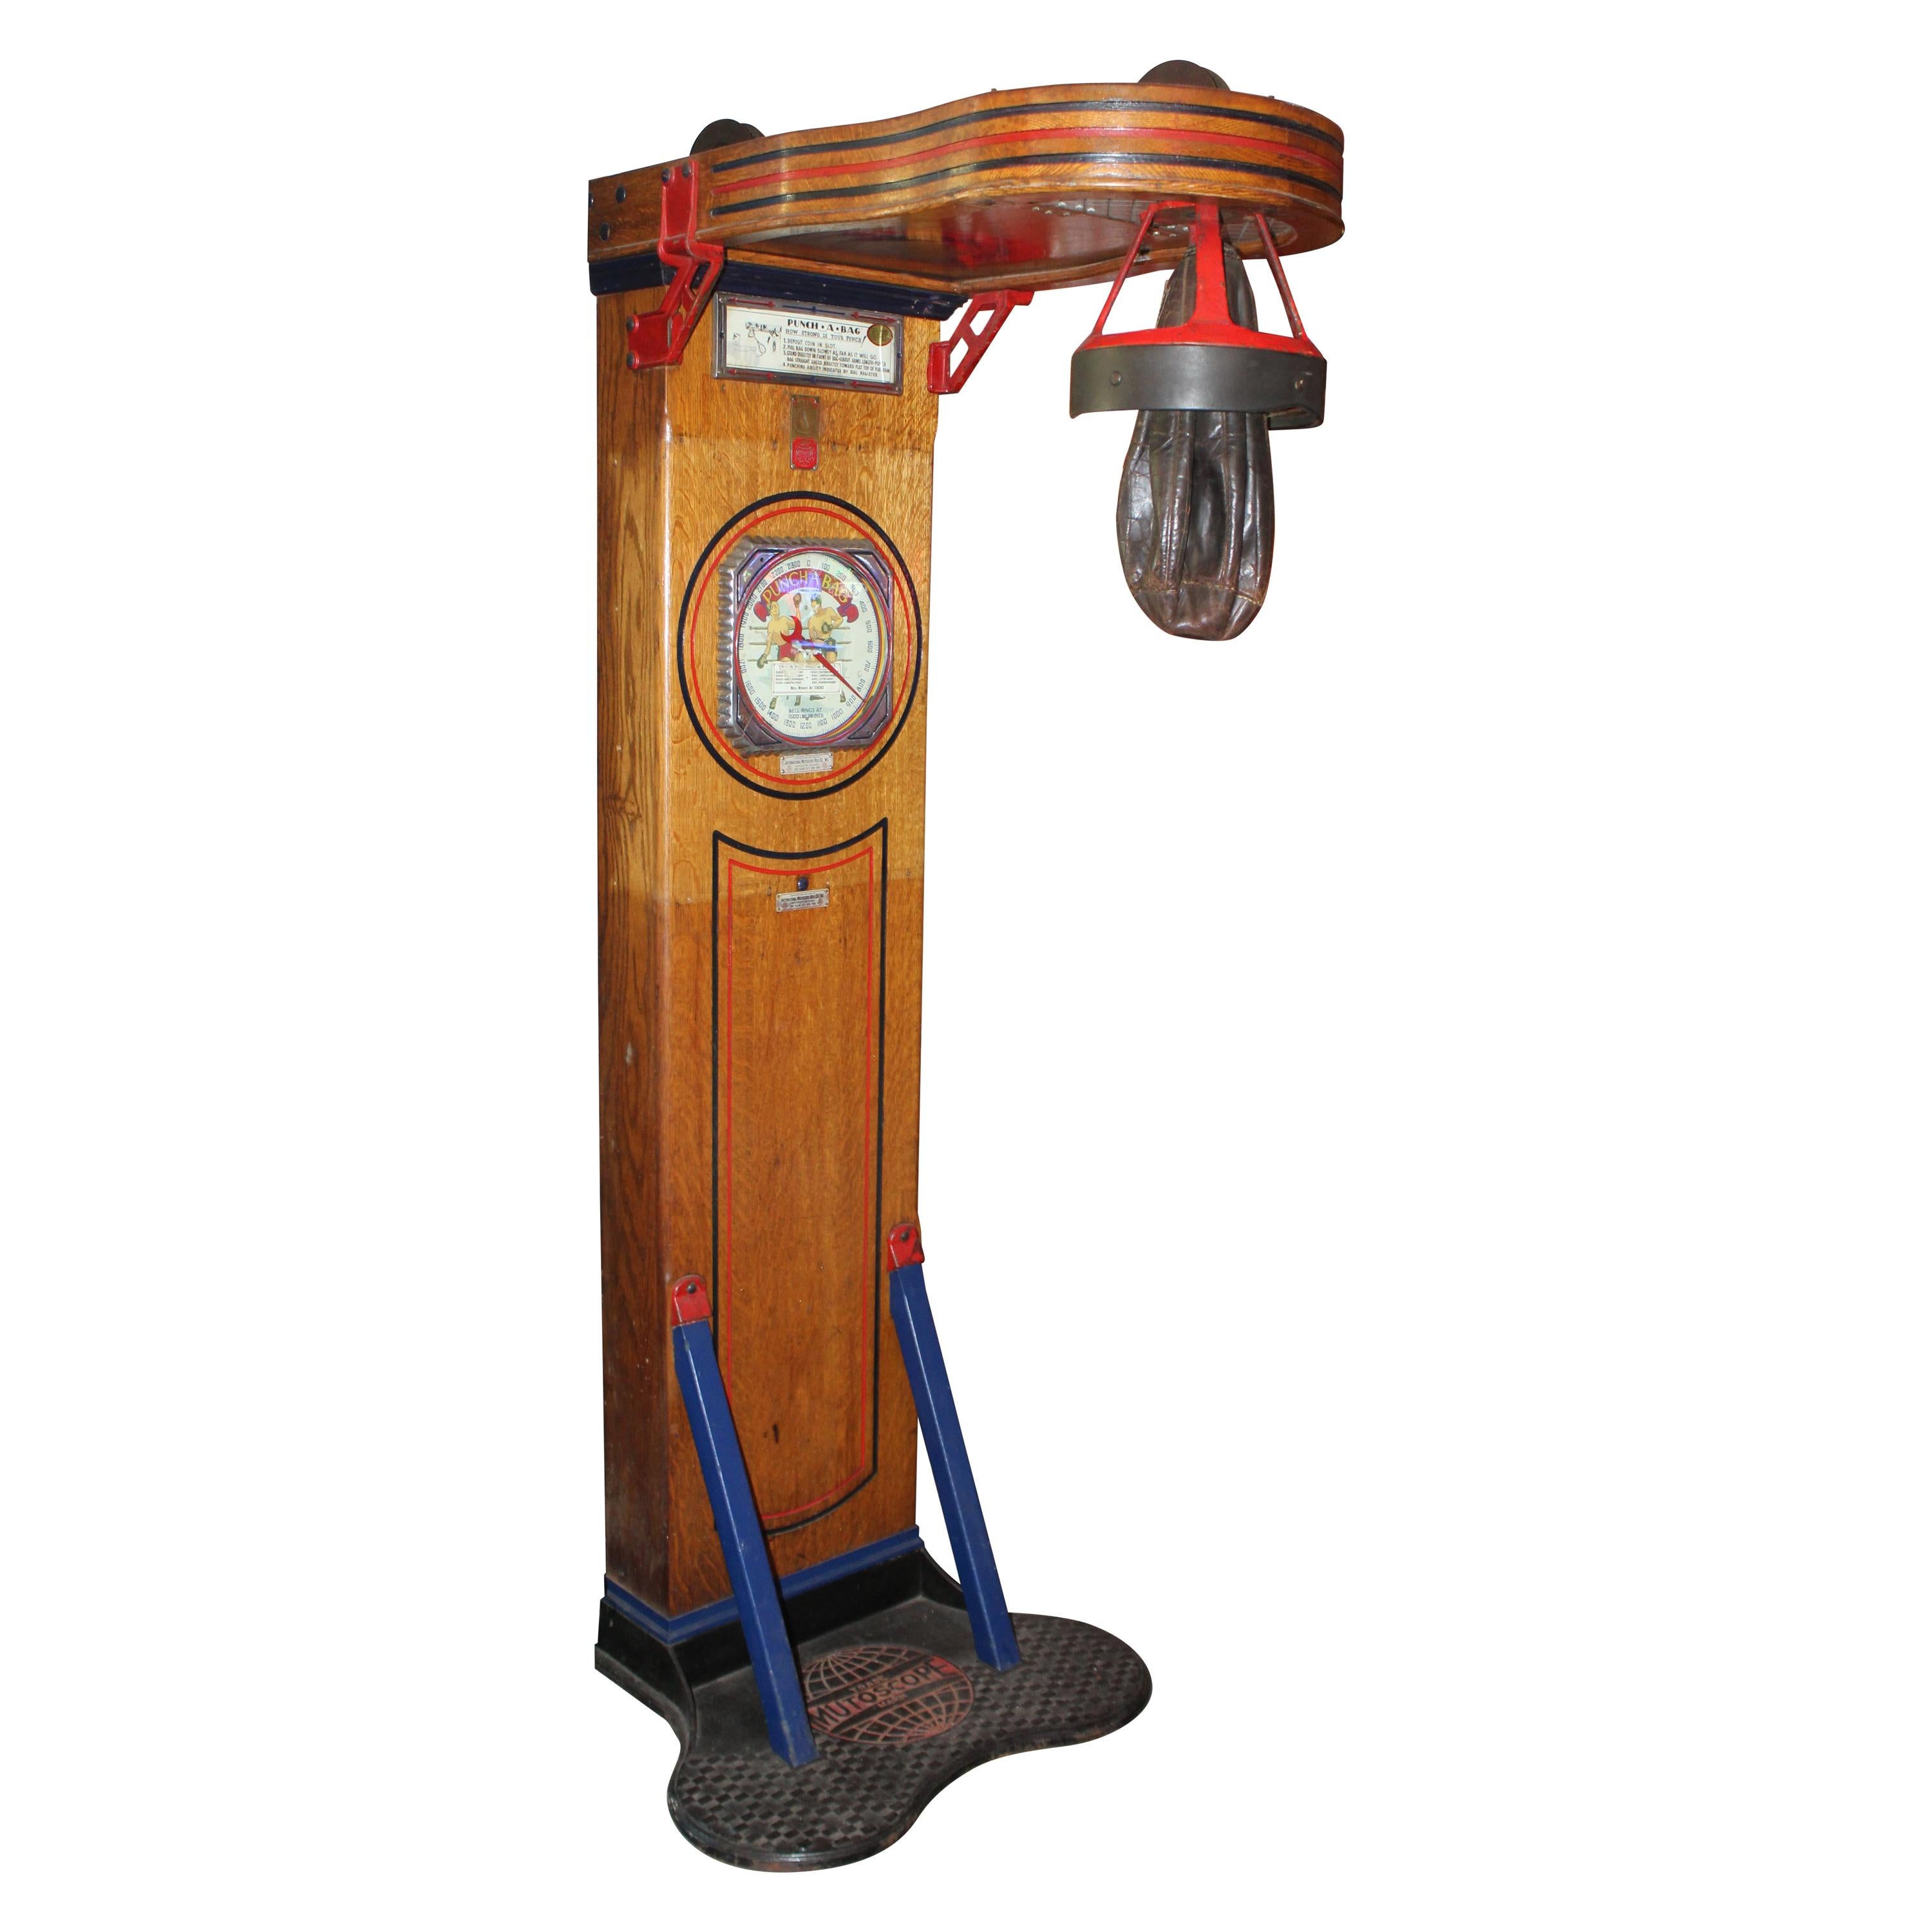 1910s-1920s Mutoscope “Punch-a-bag” Floor Punching Bag Game For Sale